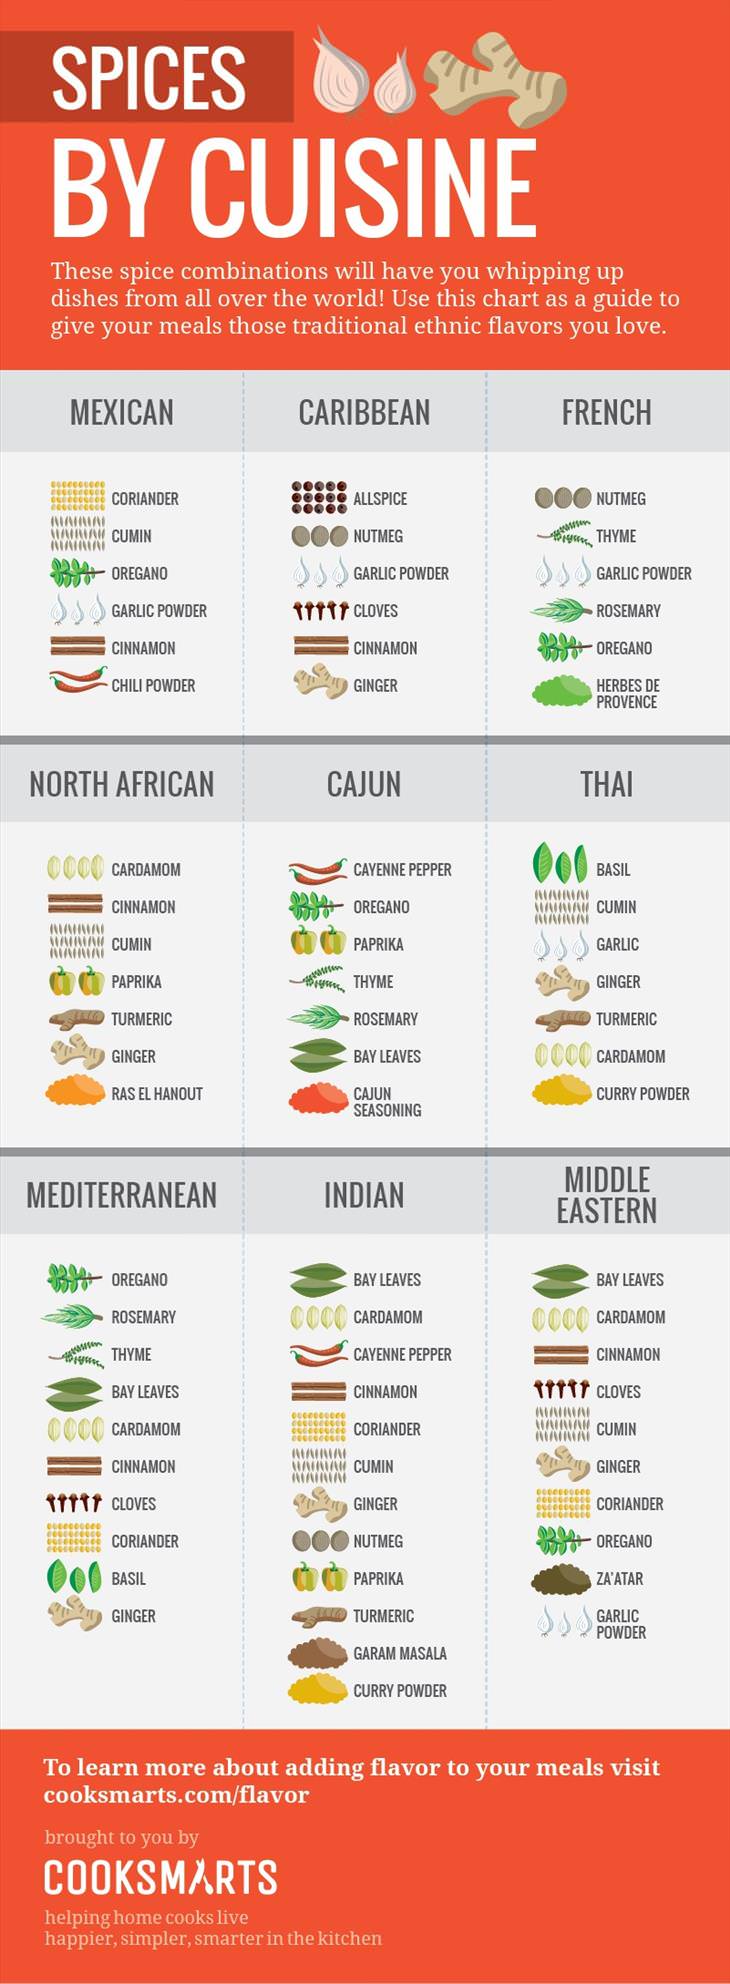 spices-cuisines